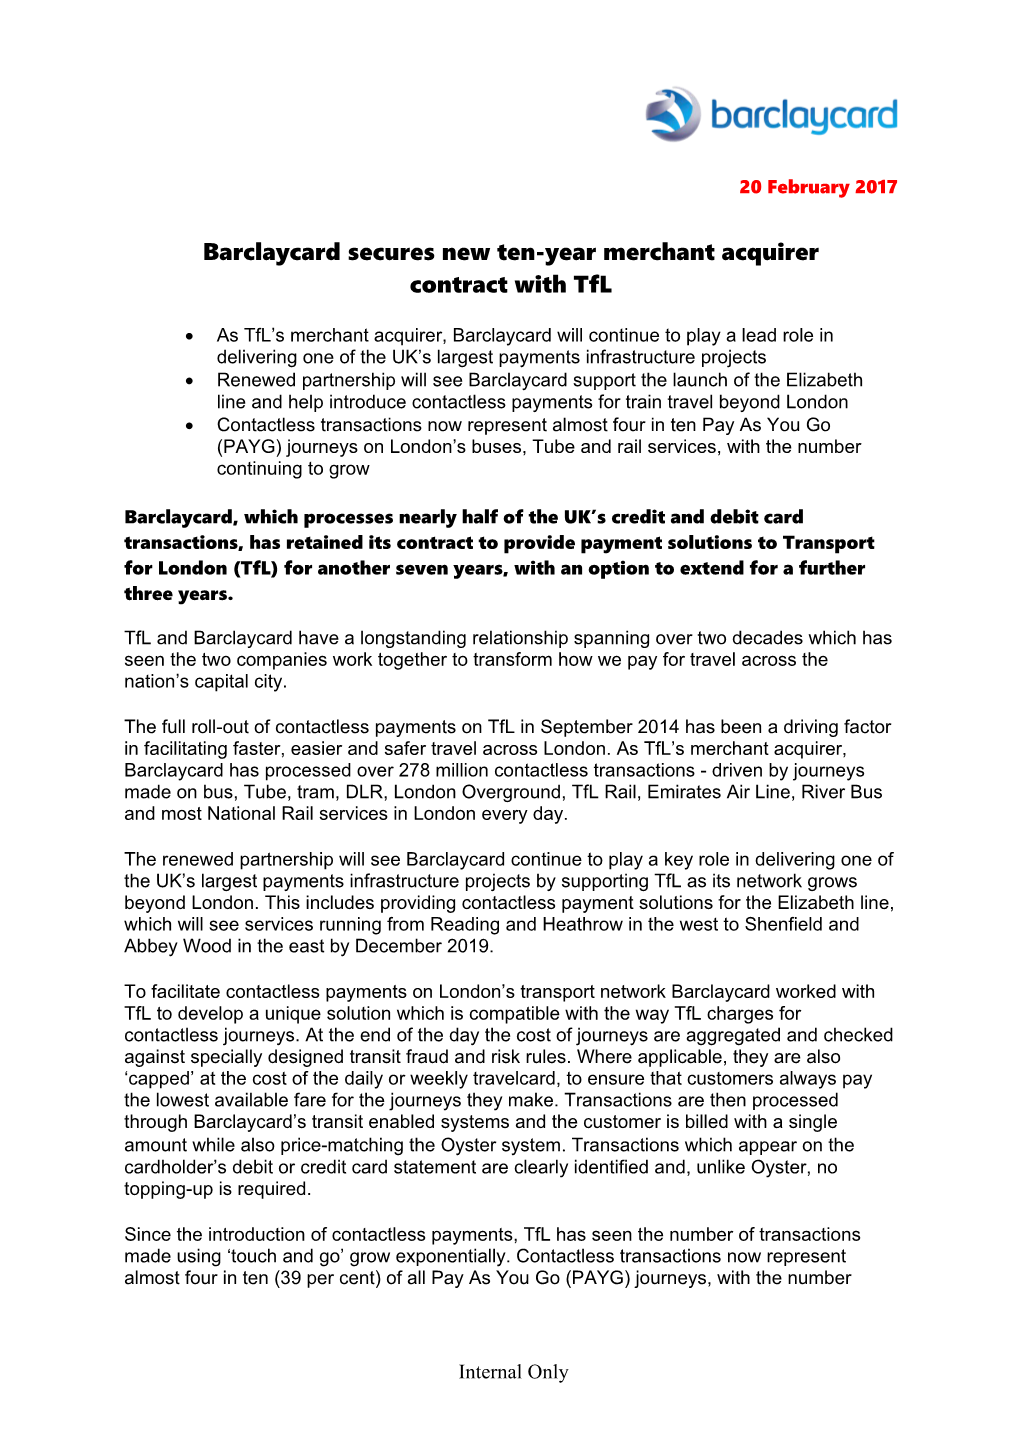 Barclaycard Secures New Ten-Year Merchant Acquirer